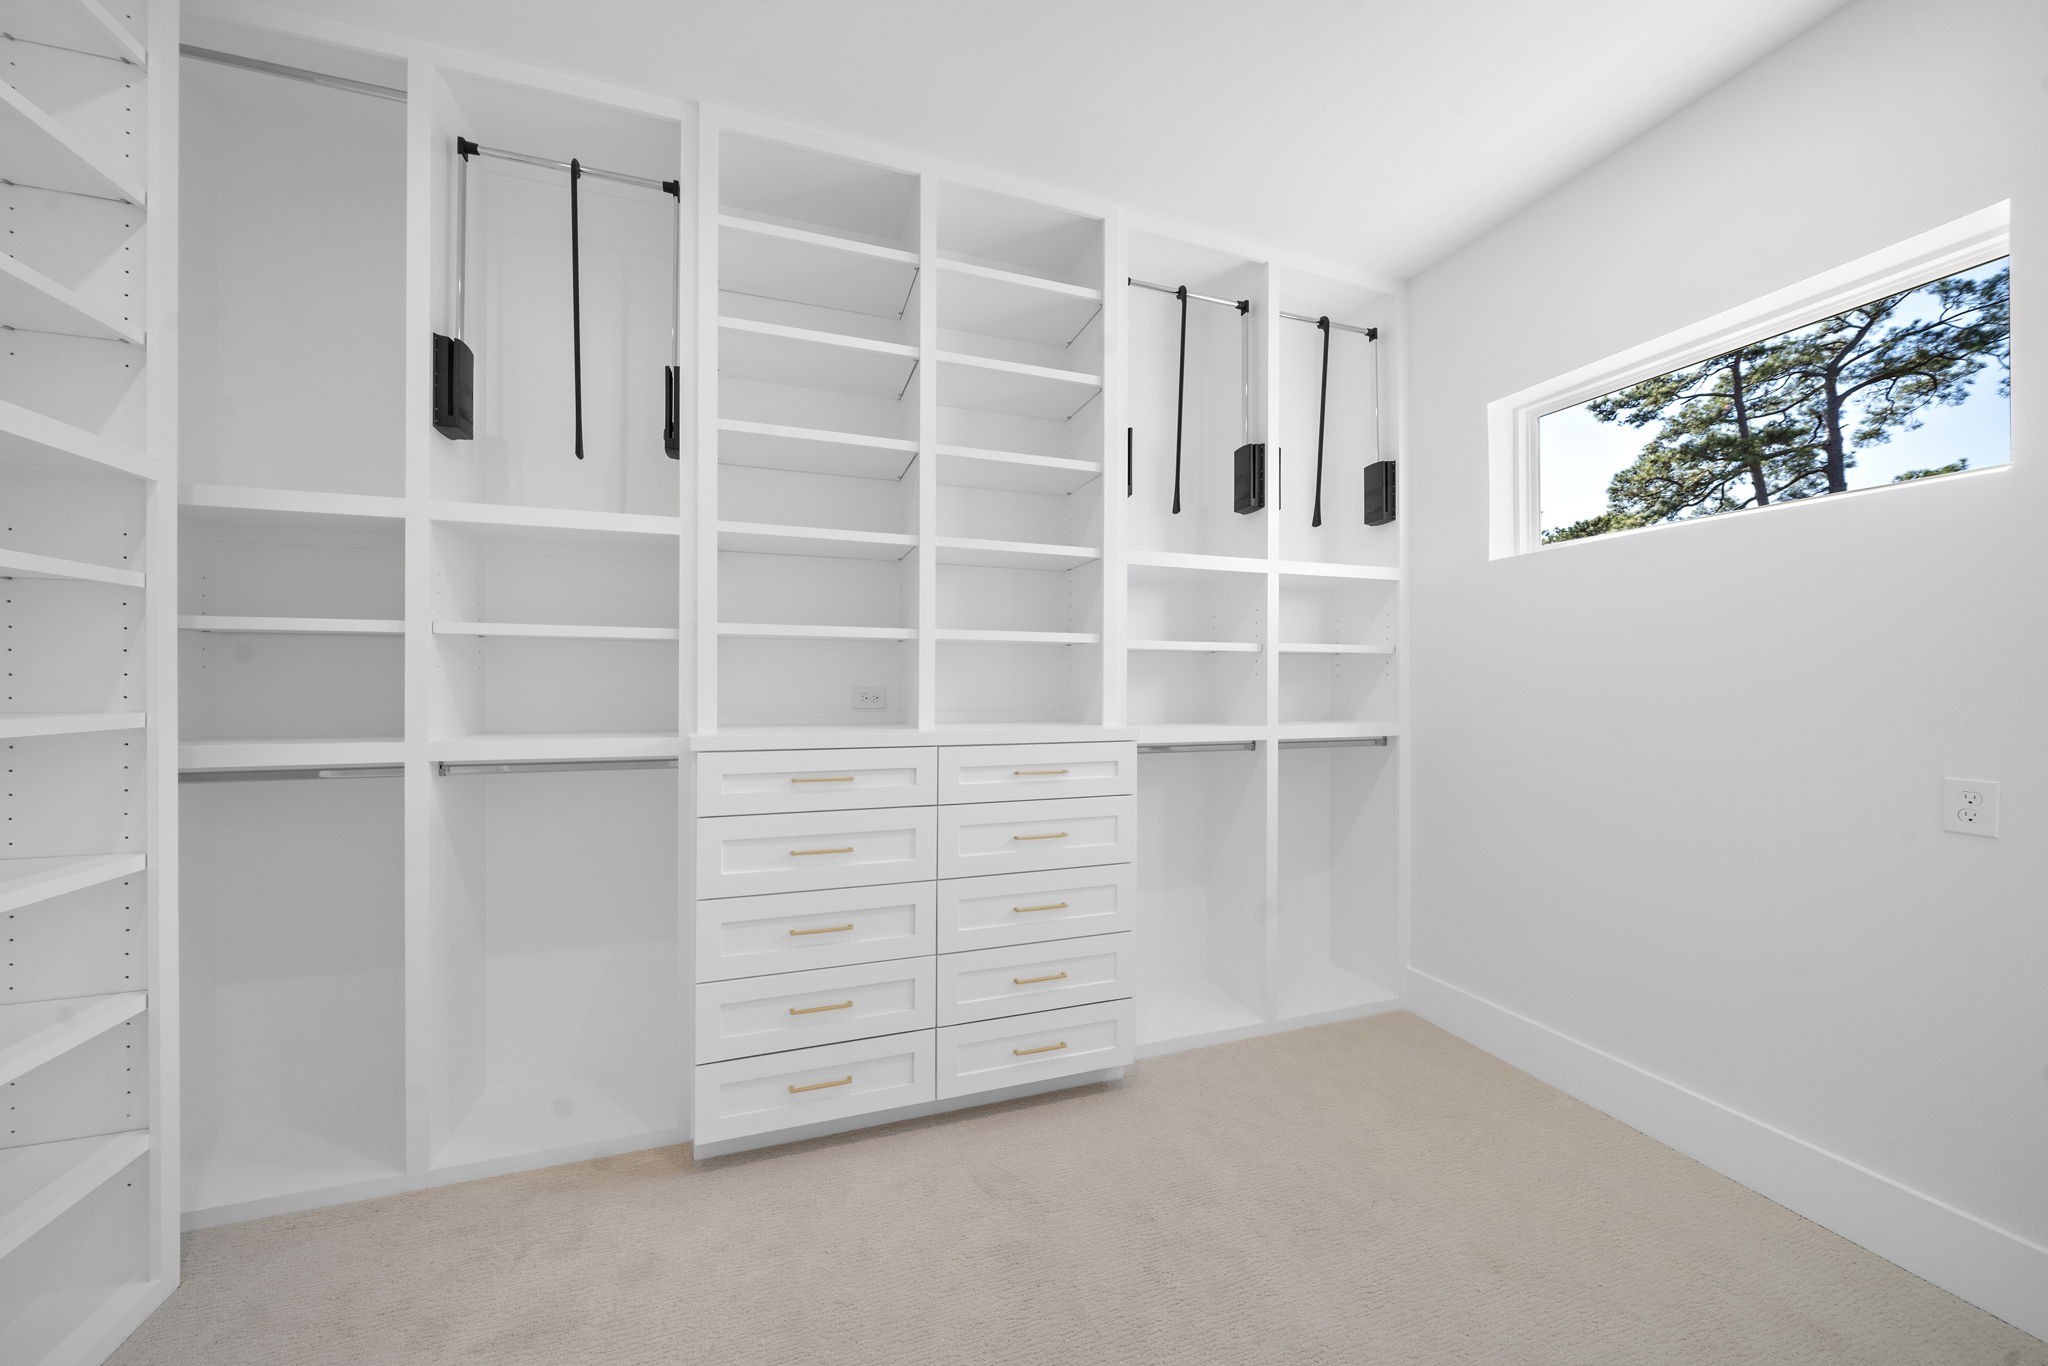 organized elegance with this walk-in closet aboundant hanging built in hanging rods, dressing rods and shelving ( with option to put a washer and dryer )